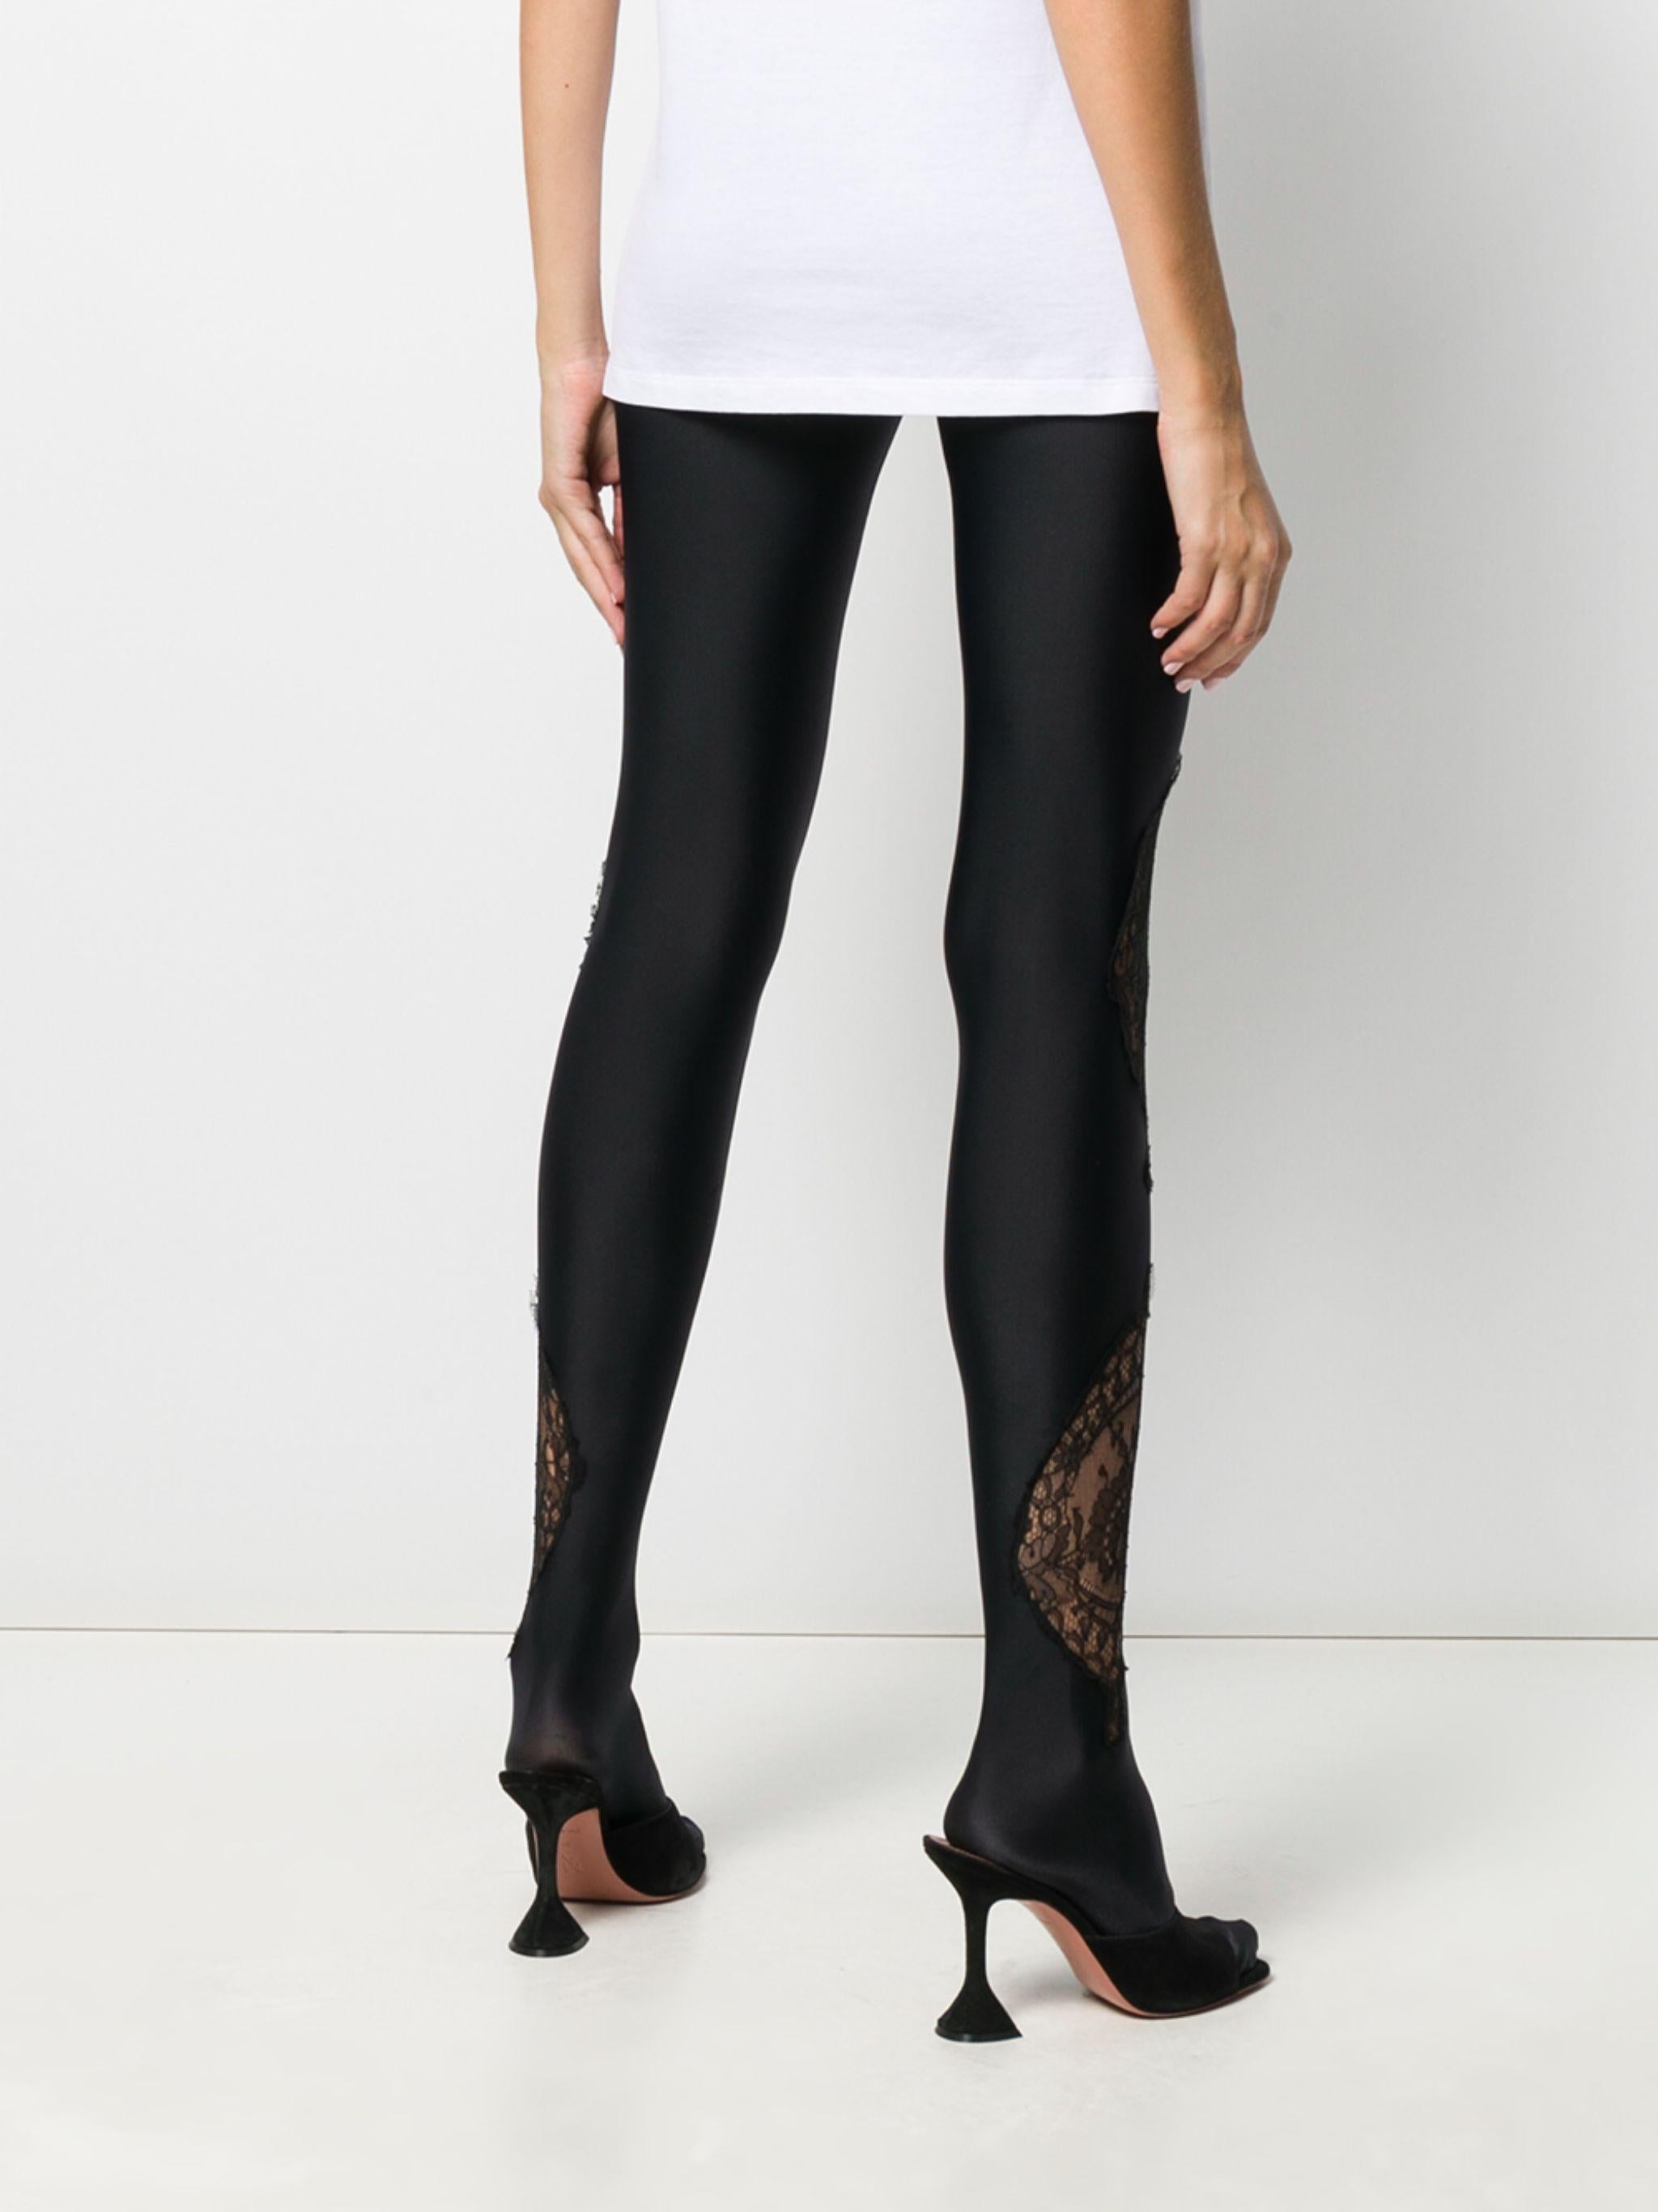 Versace Fall 2019 Runway Black Lace Panelled Jersey Leggings / Tights Size 2 11